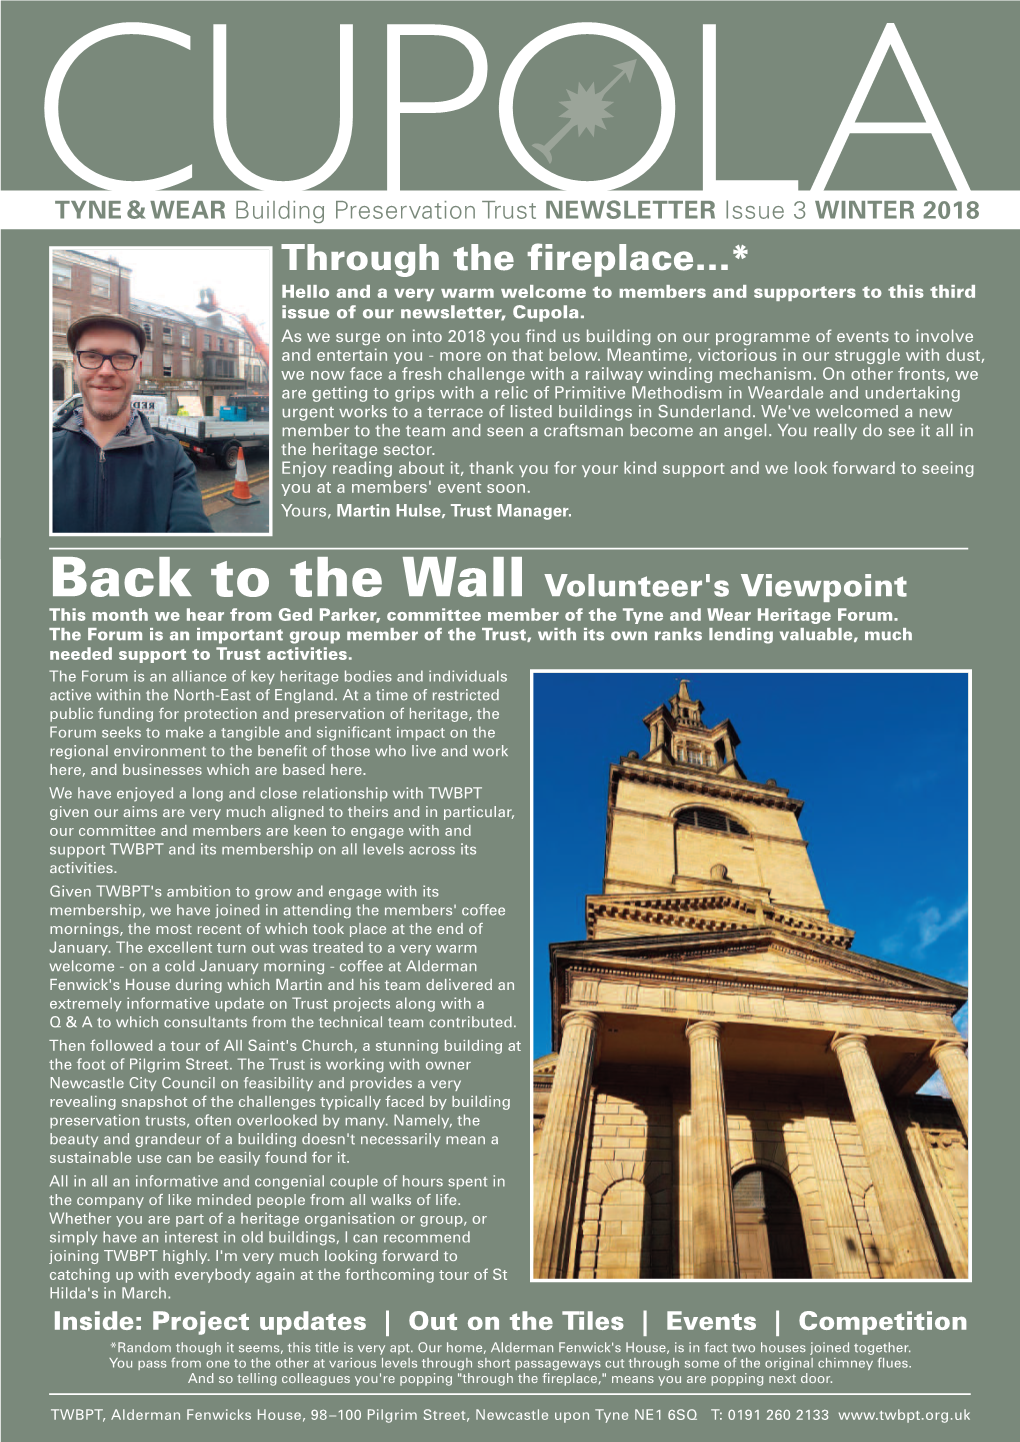 Through the Fireplace...* Hello and a Very Warm Welcome to Members and Supporters to This Third Issue of Our Newsletter, Cupola